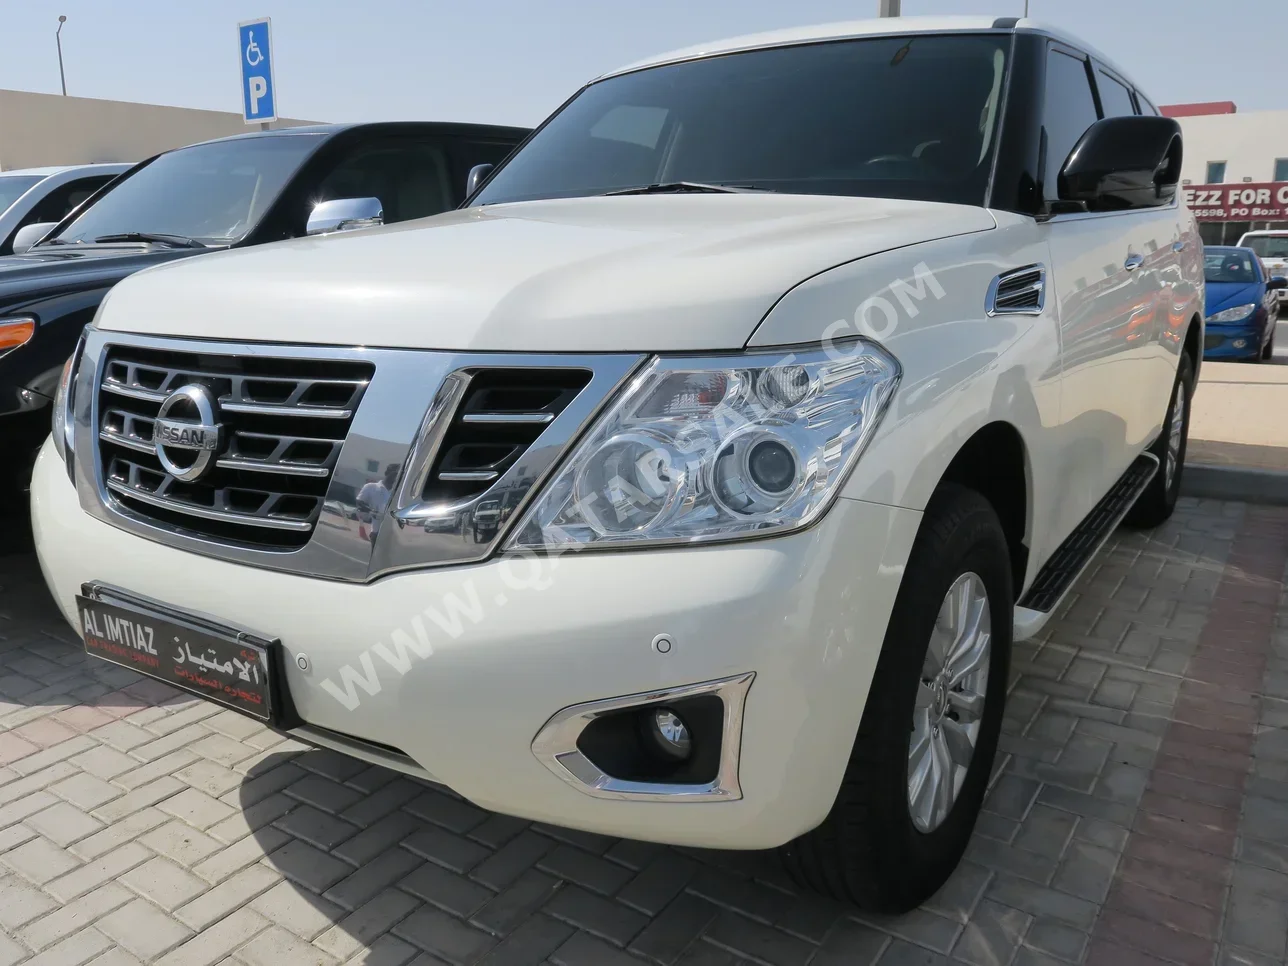 Nissan  Patrol  XE  2019  Automatic  129,000 Km  8 Cylinder  Four Wheel Drive (4WD)  SUV  White